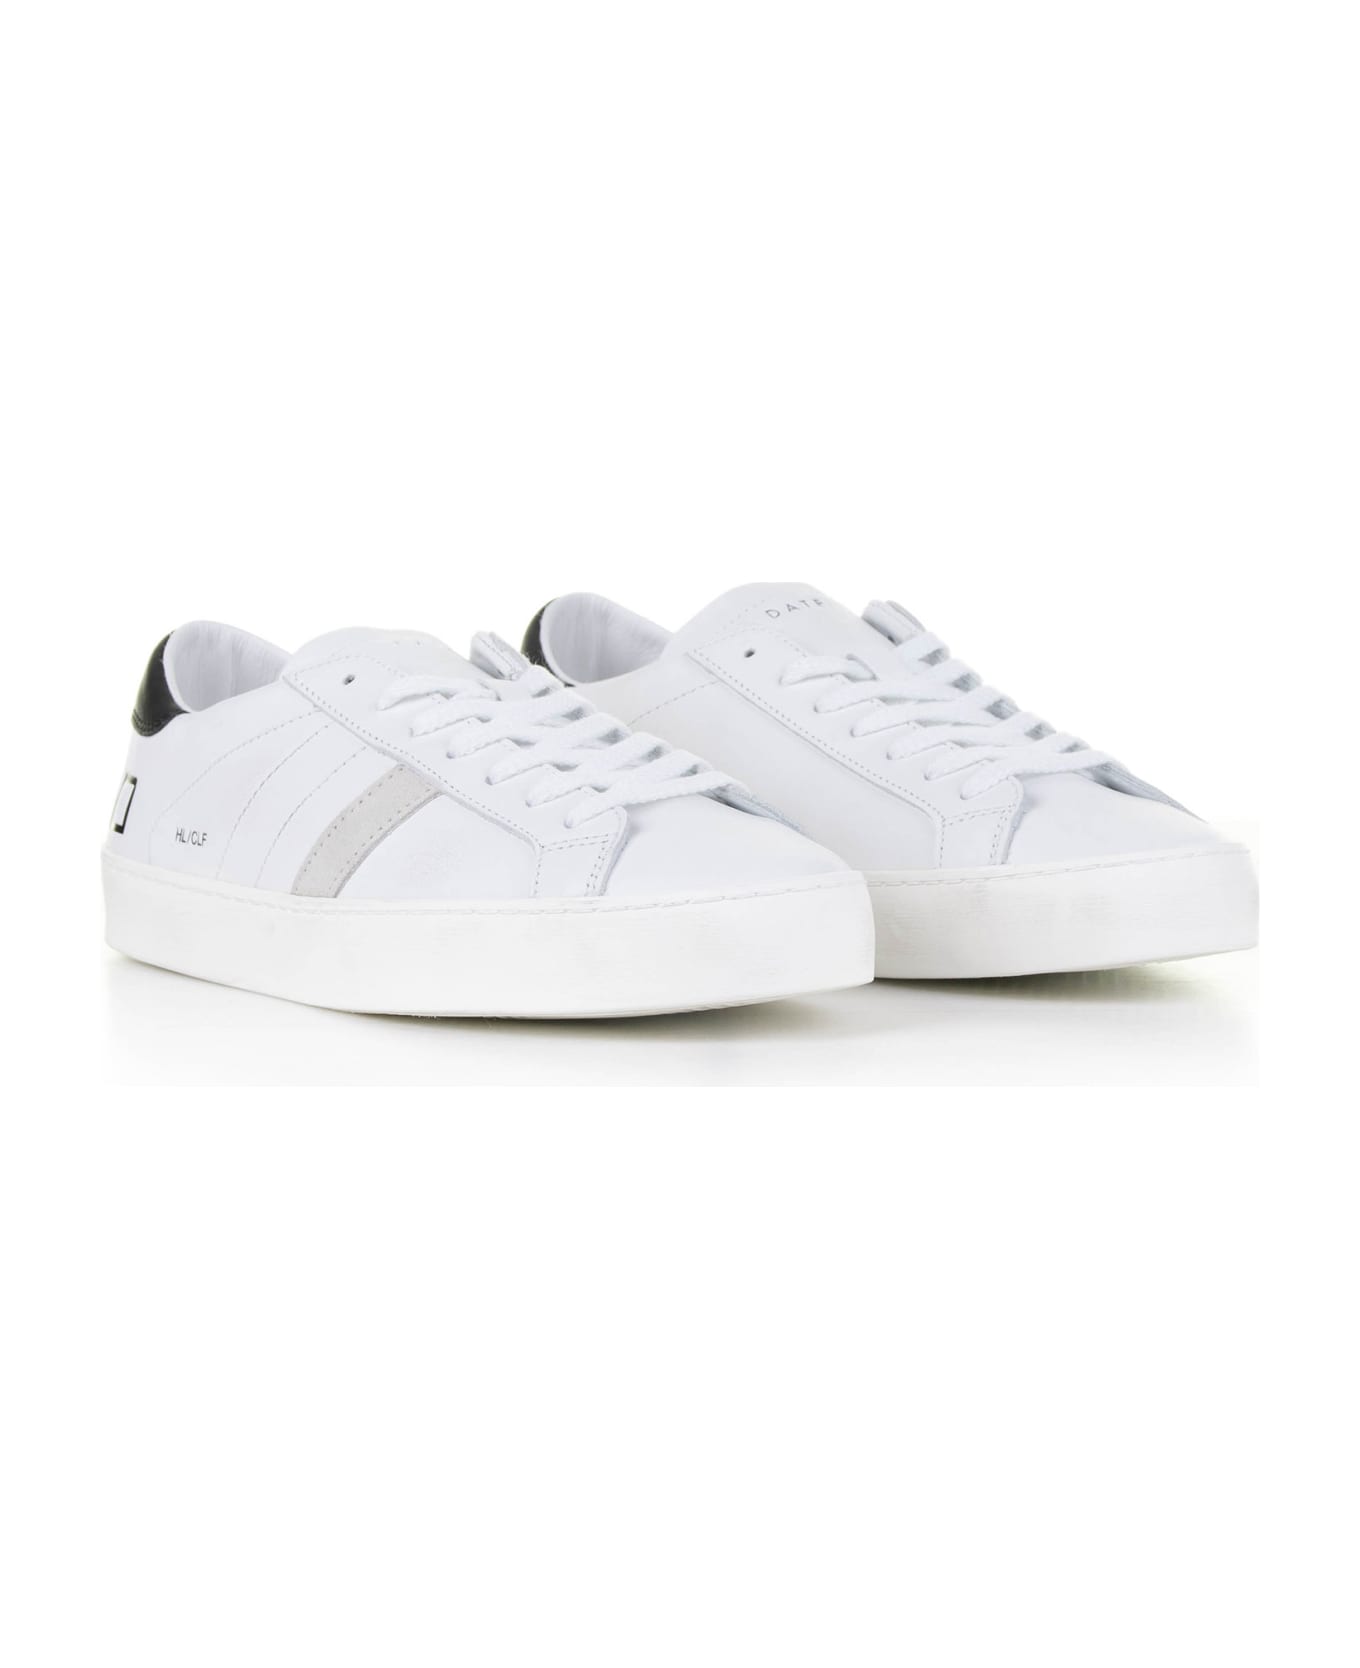 D.A.T.E. Hill Low White Leather Sneaker